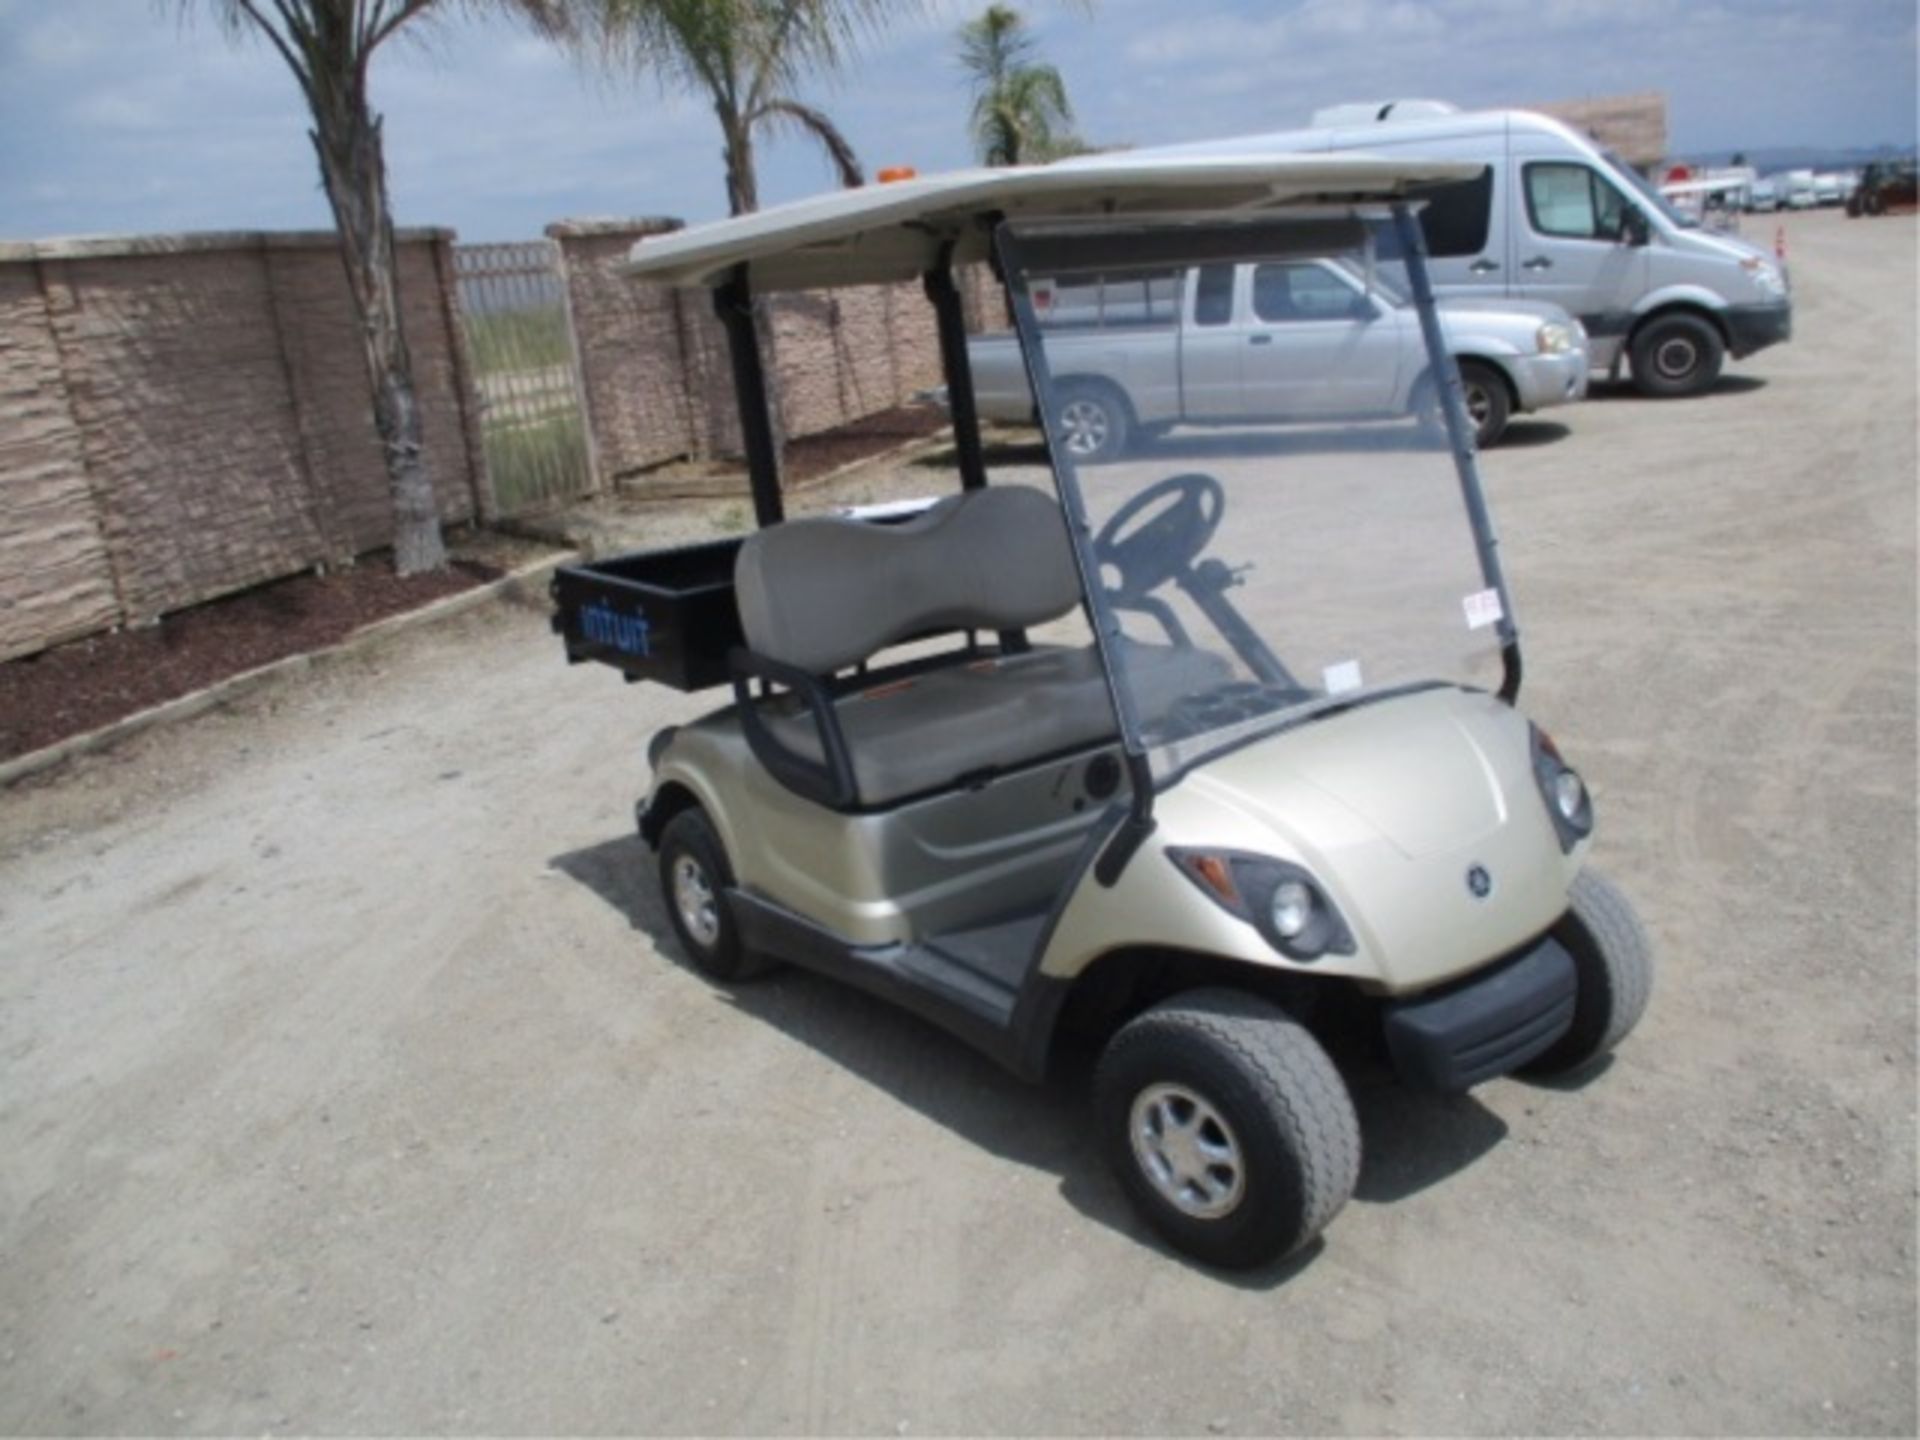 Yamaha Utility Golf Cart, Electric, Rear Metal Bed, Canopy, Includes Charger, S/N: JW1-F423610 - Image 4 of 24